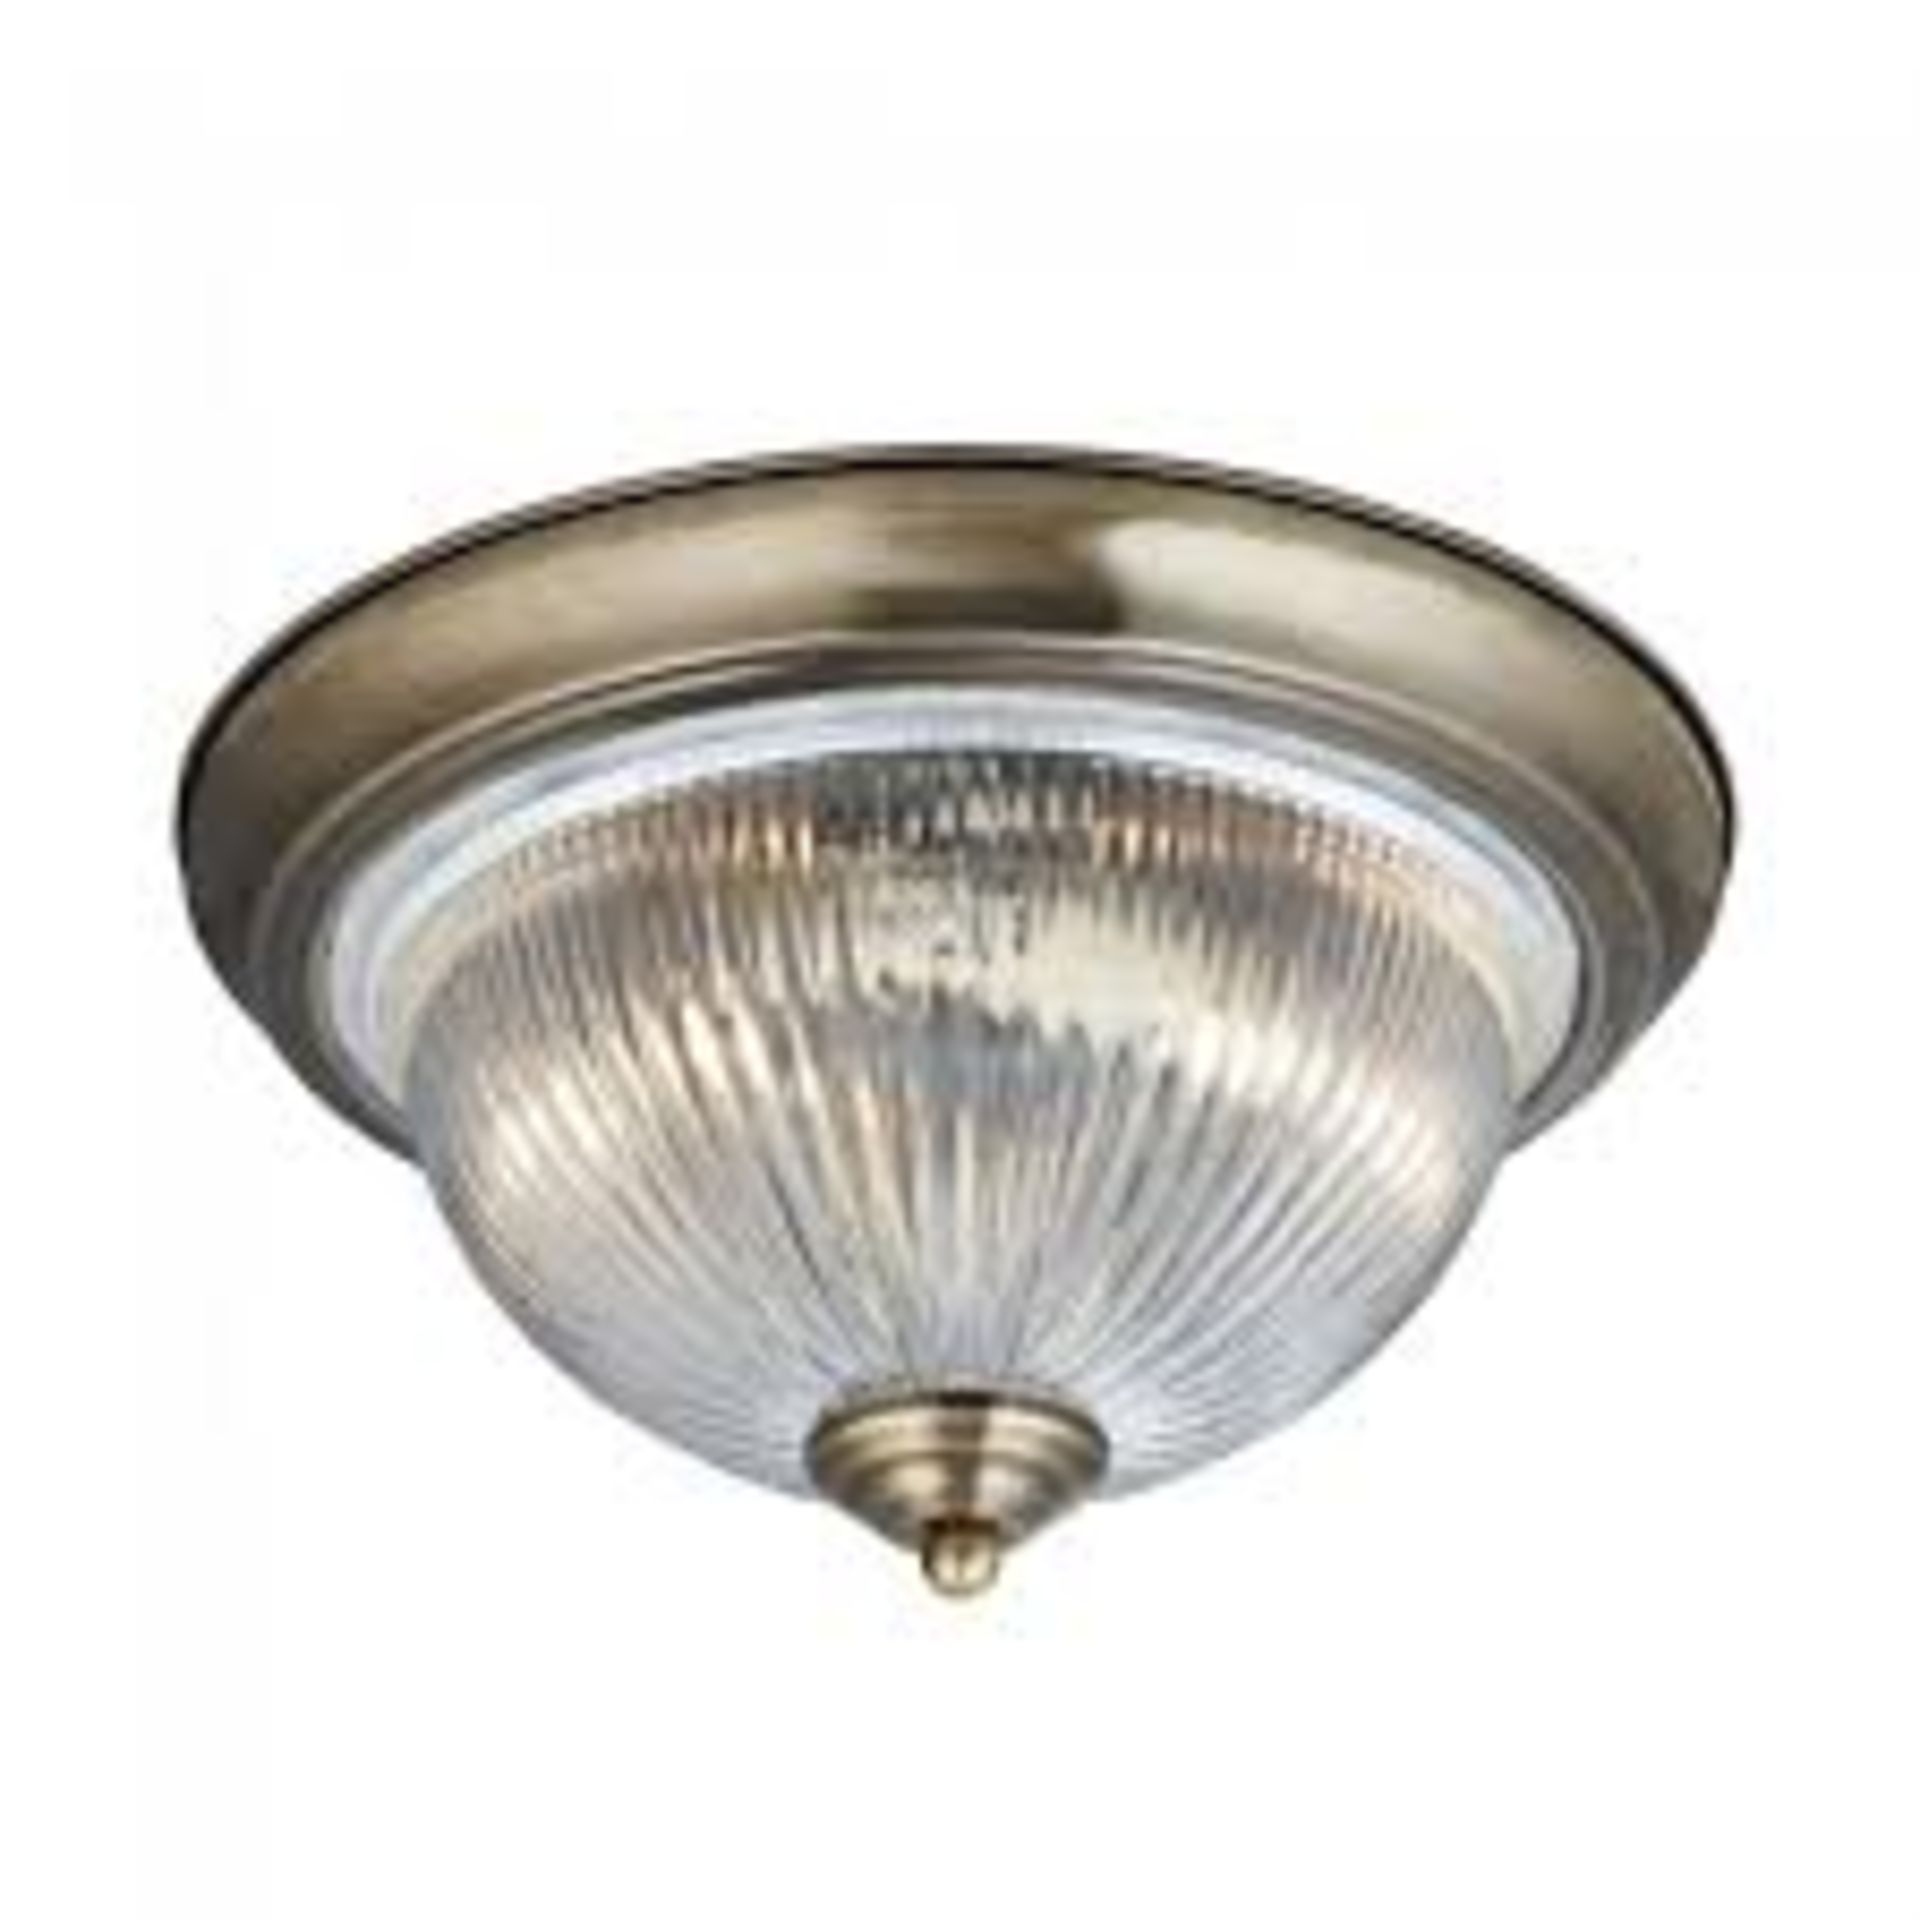 1 x Searchlight Bathroom Flush in Antique Brass - Ref: 4370 - New and Boxed stock - RR: £50 - Image 3 of 4